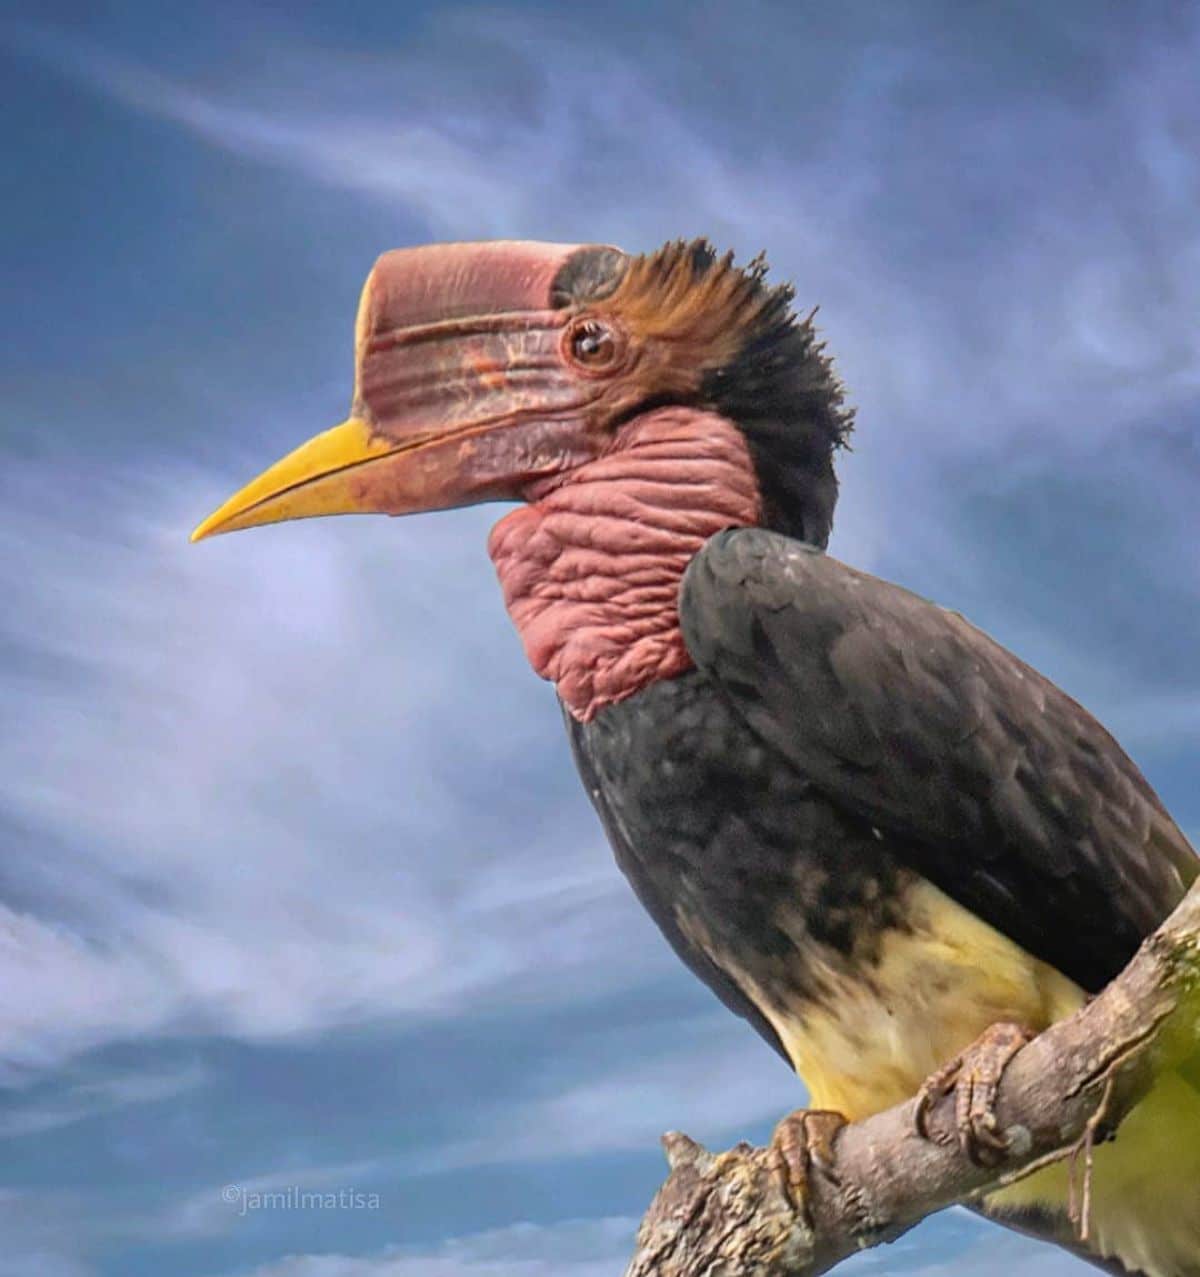 A beautiful Helmeted Hornbill perched on a branch.